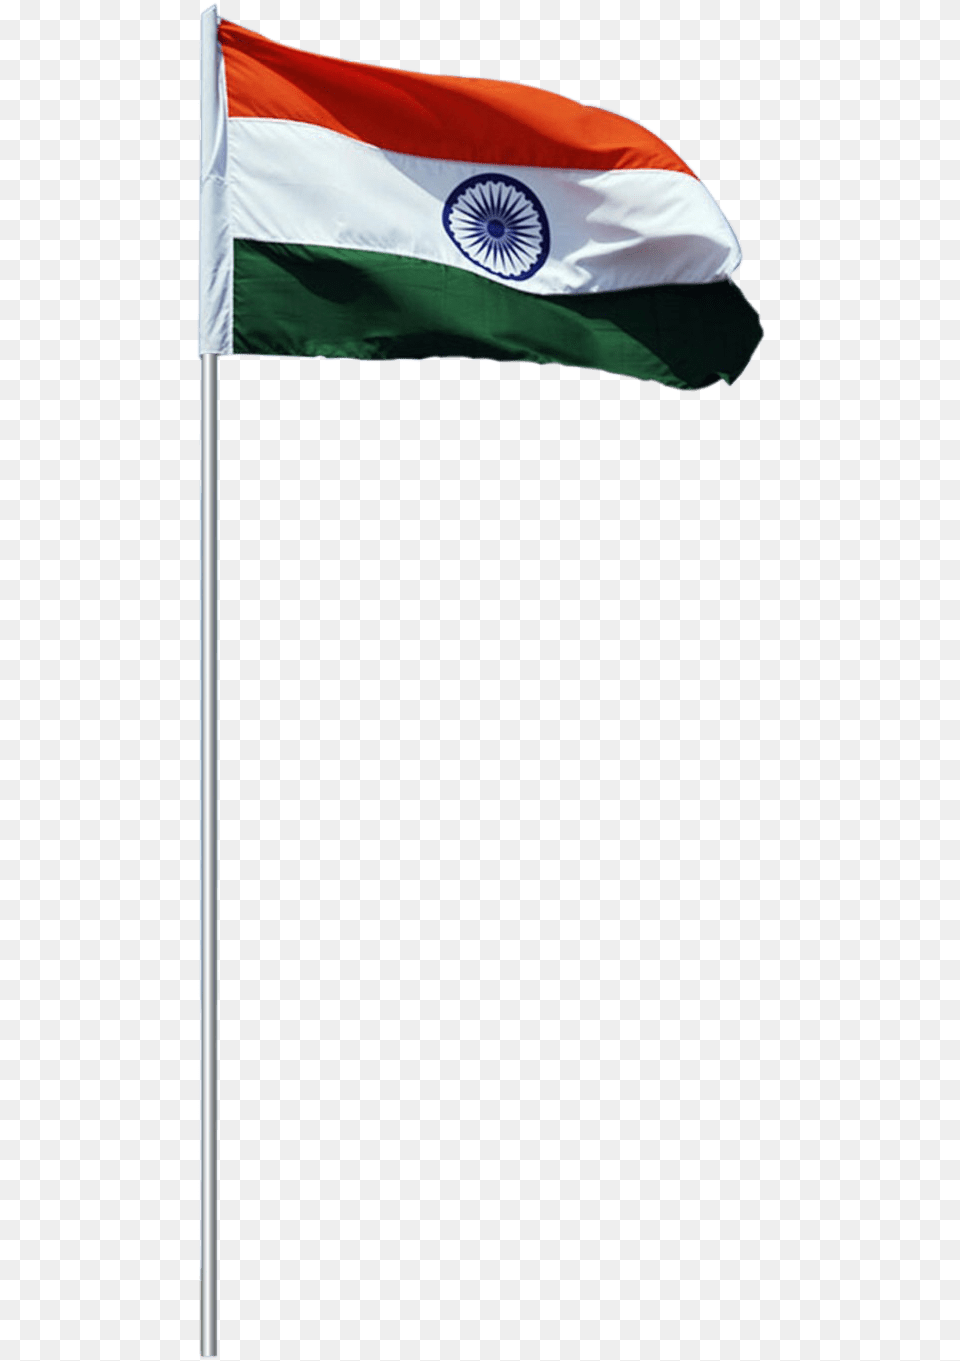 This Is A Of Futuristic Photo Editing I Hope Its 26 January Background, Flag, India Flag Png